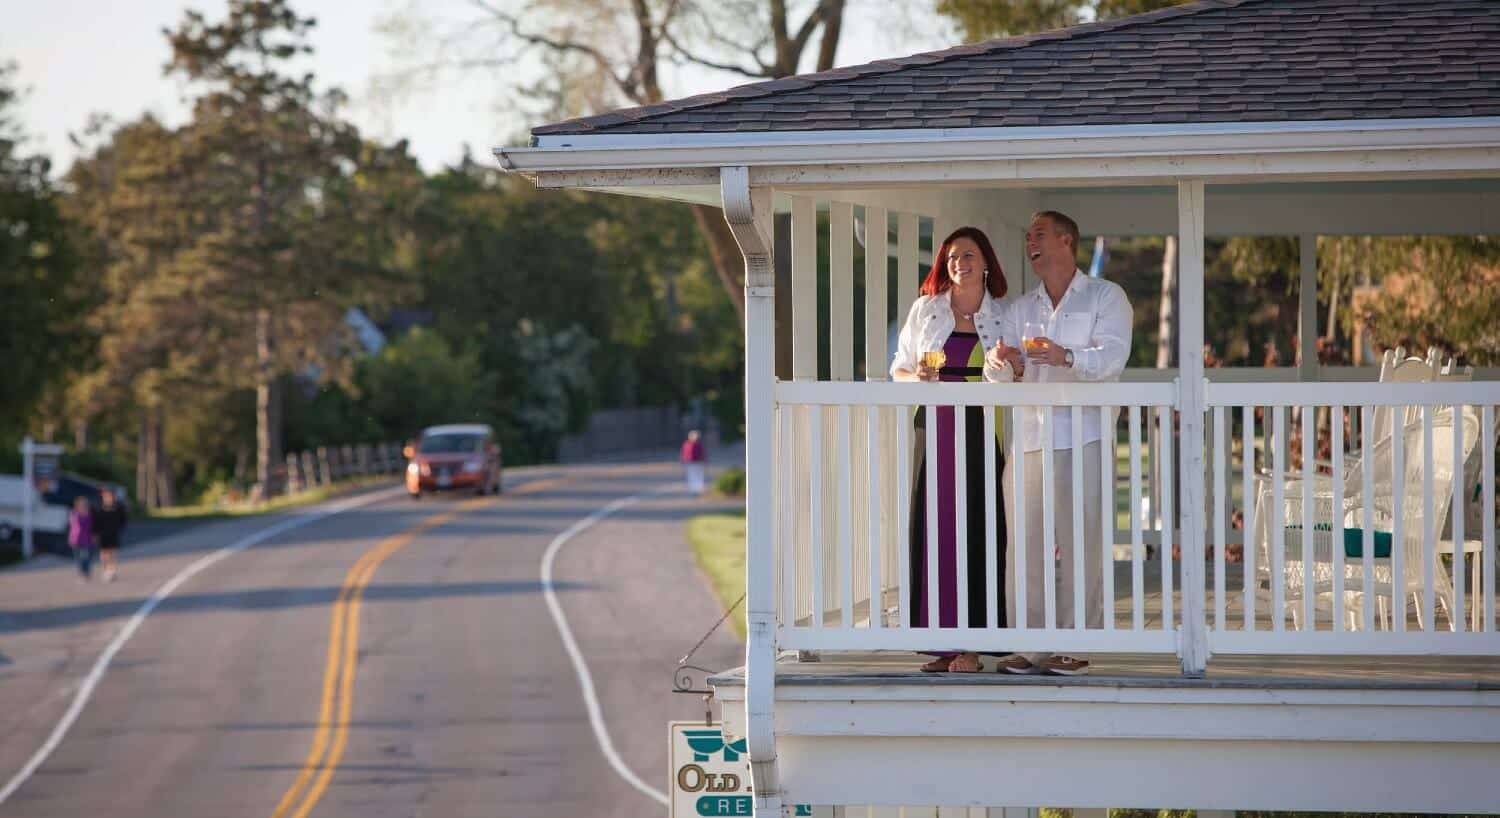 A man and woman standing on an upper level deck with white railings overlooking a two lane road with trees